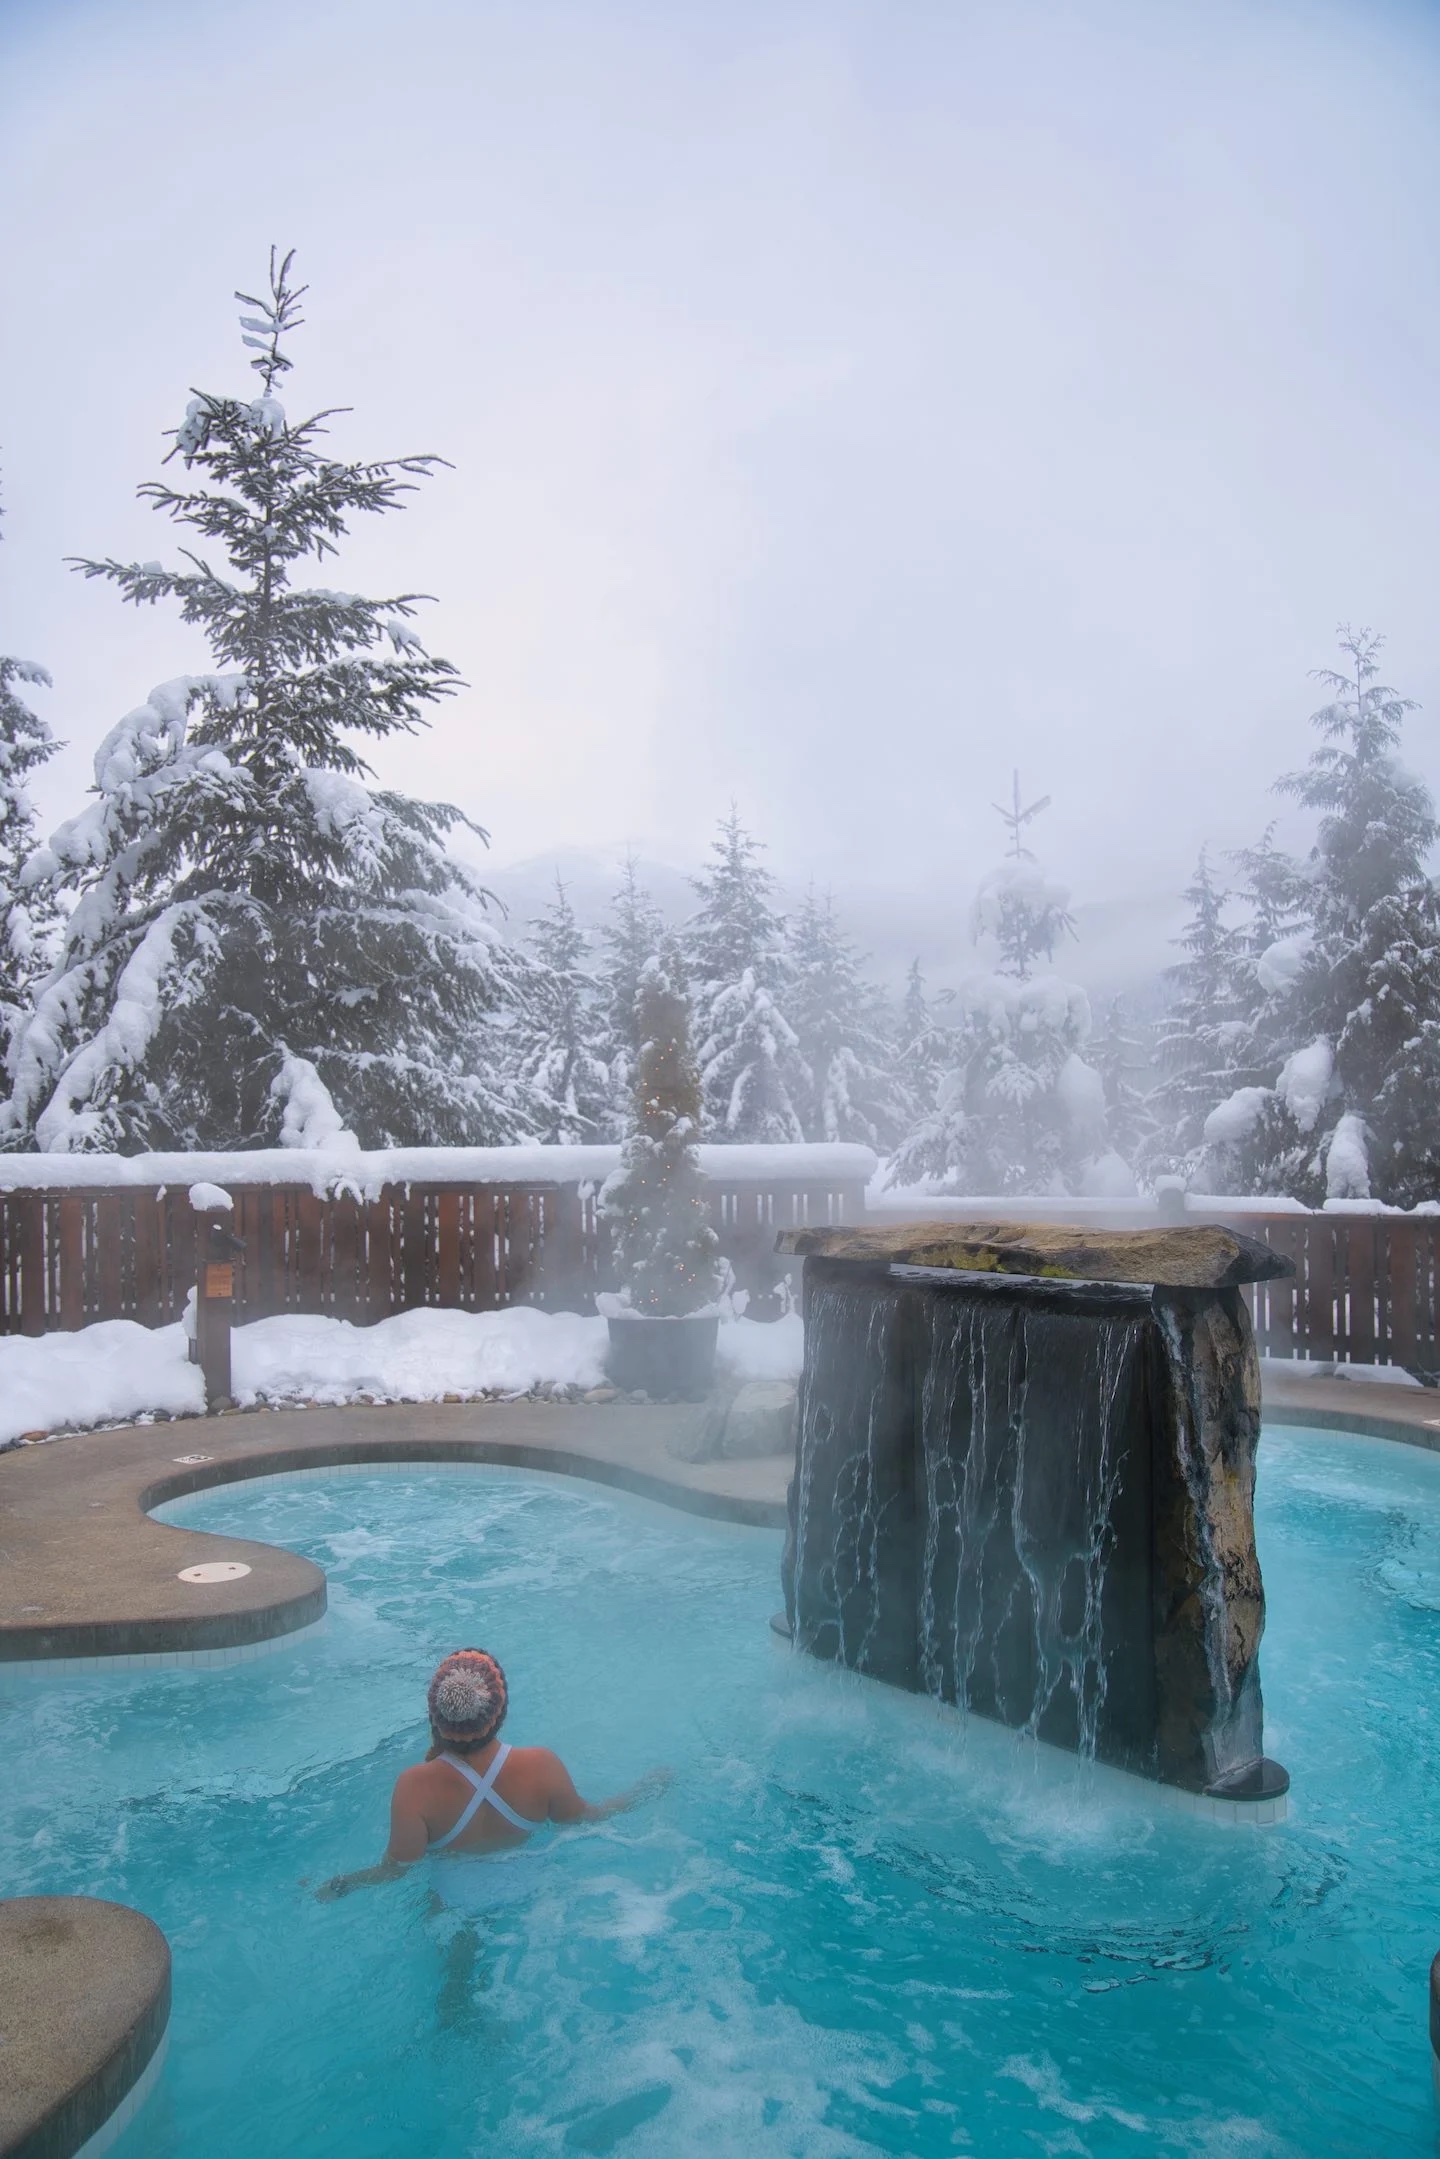 The Best Things to do in Whistler - Scandinave Spa